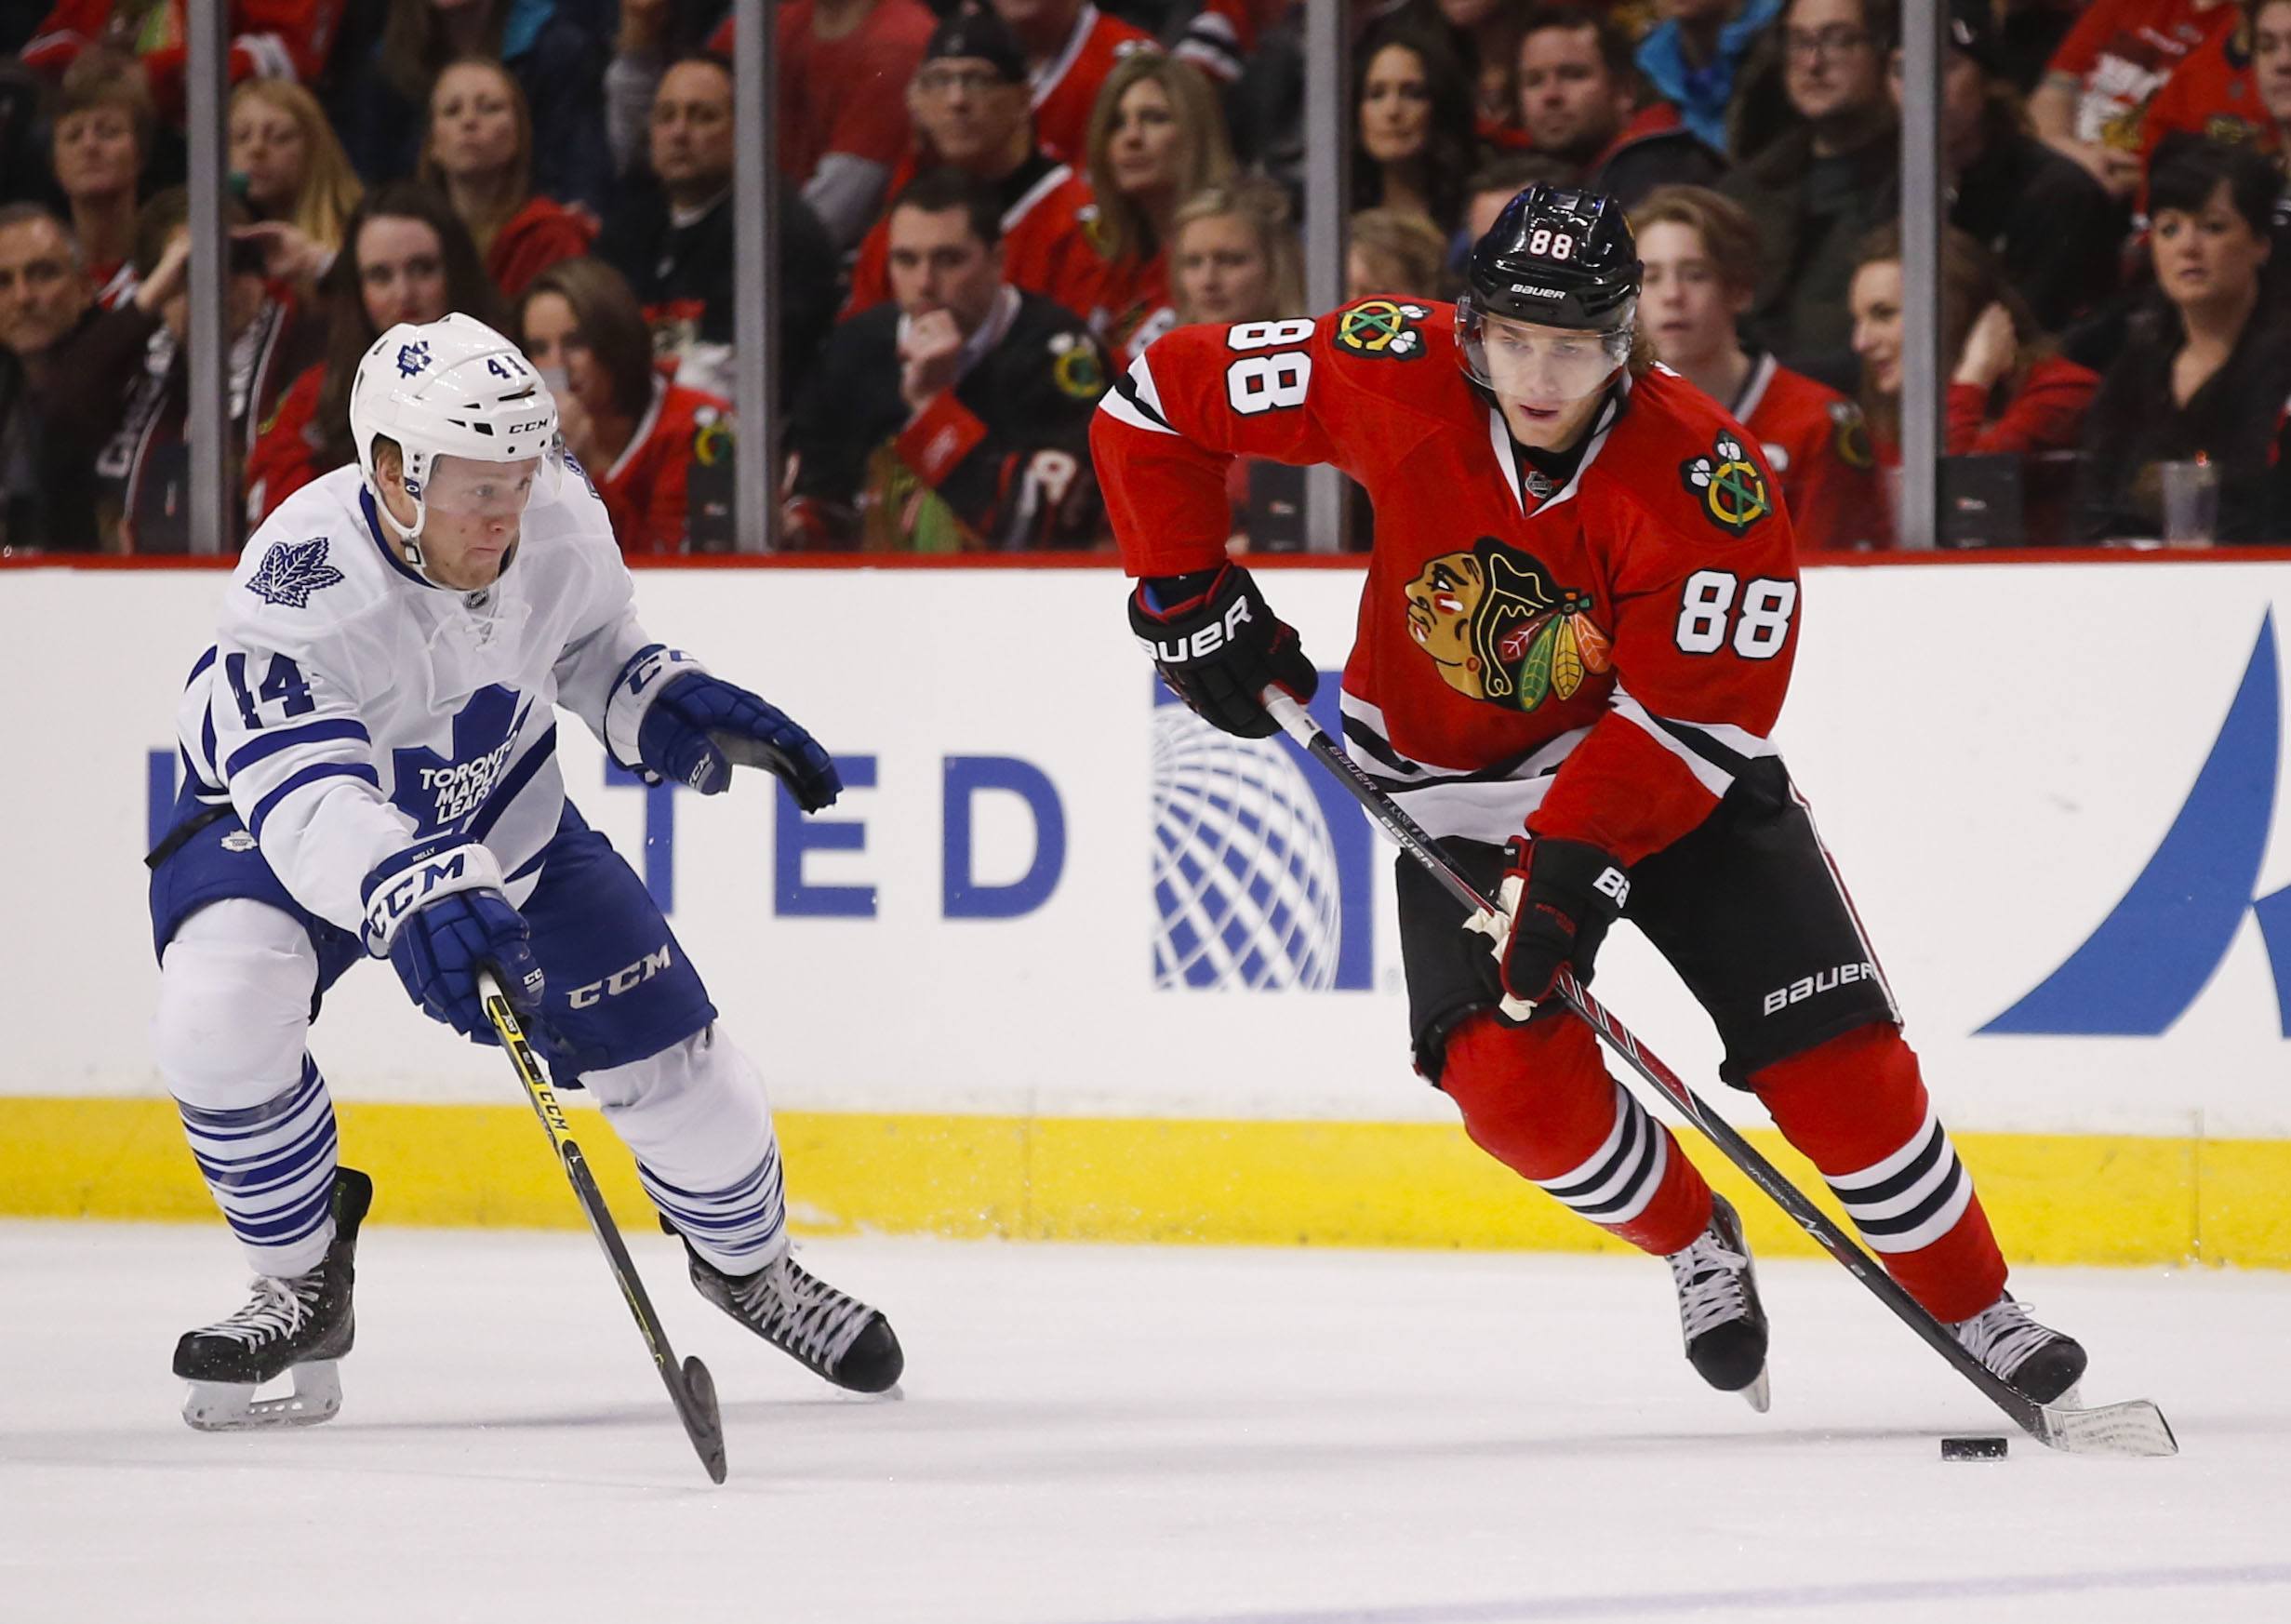 Toronto Maple Leafs vs. Chicago Blackhawks -- Preview, Projected